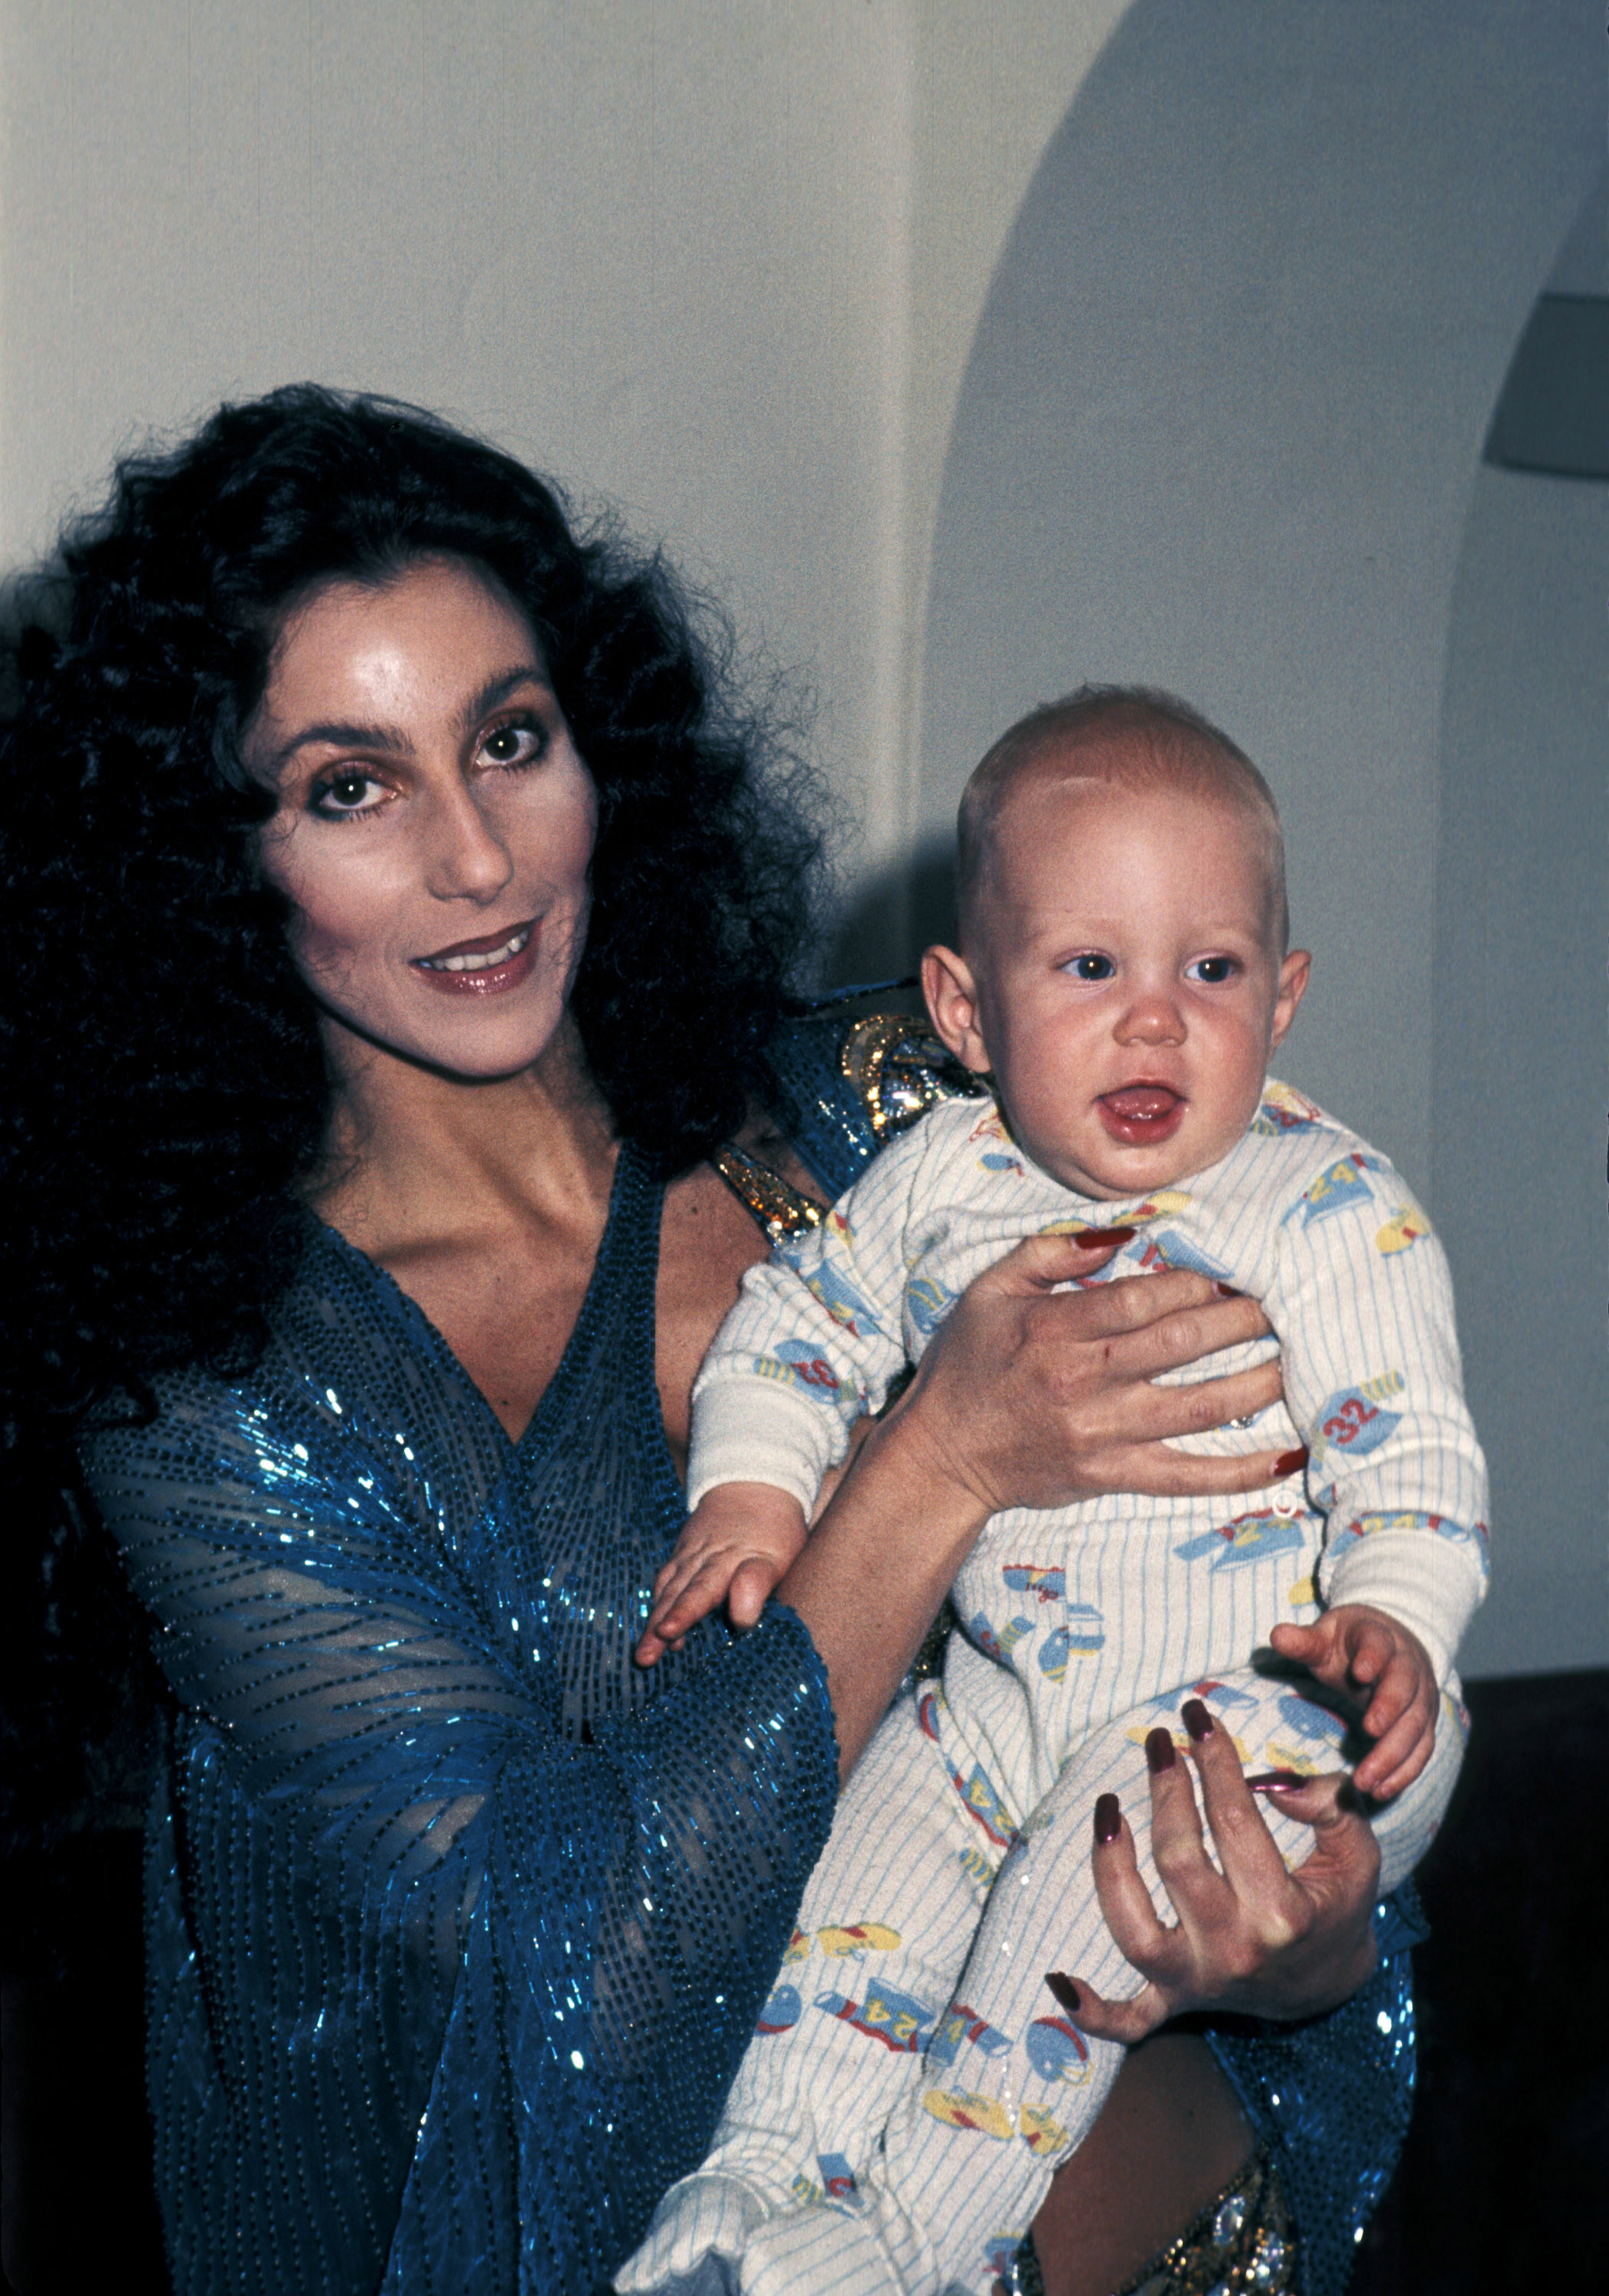 Cher and Elijah Blue Allman during Filmex '77 at Century Plaza in Los Angeles, California on March 31, 2011. | Source: Getty Images